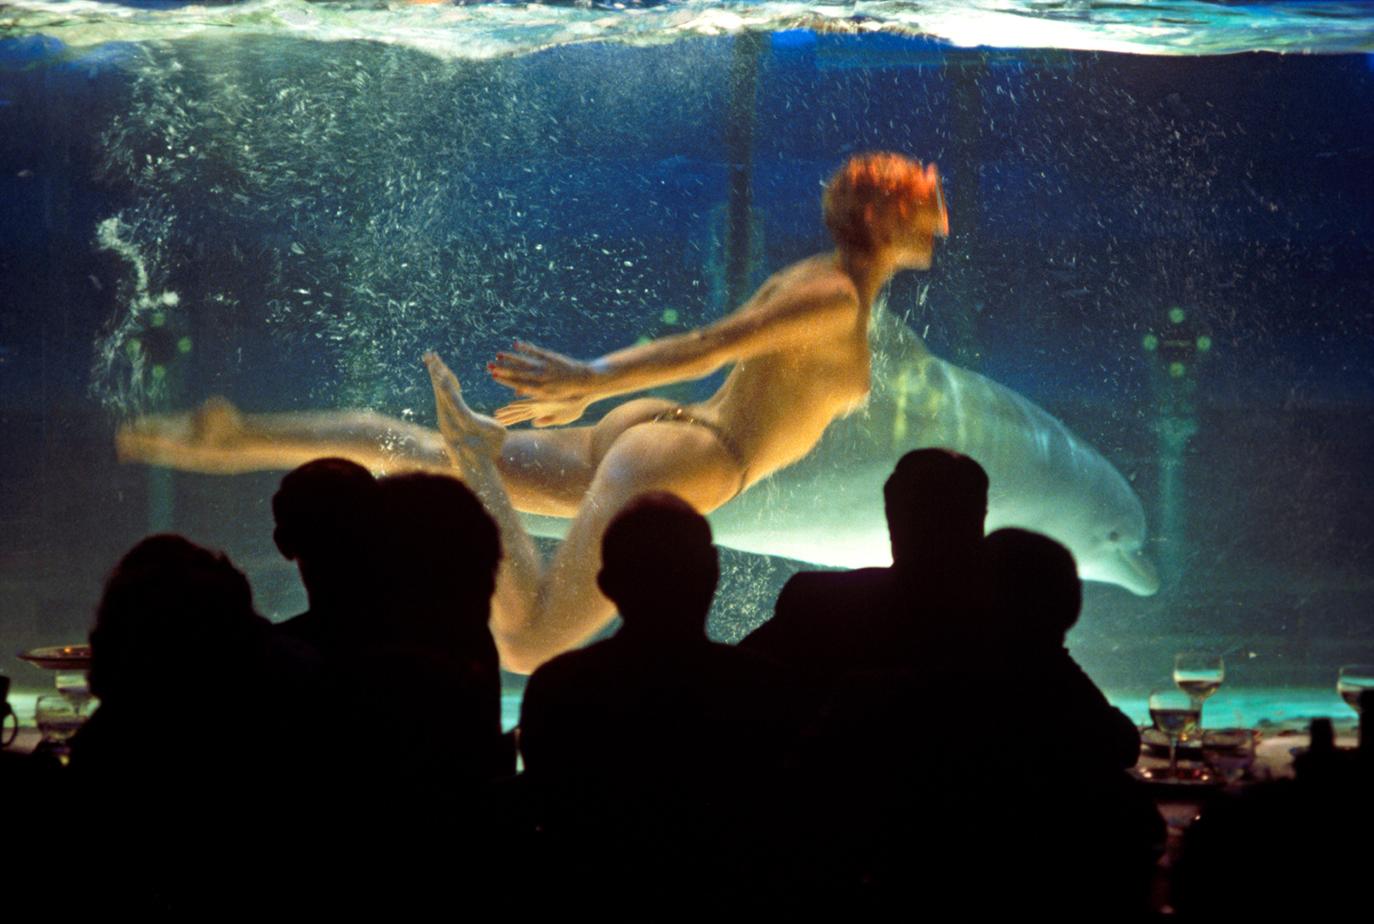 Moulin Rouge Mermaid
by Alain Le Garsmeur

A performer at the Moulin Rouge Cabaret swims underwater with a dolphin in a tank, Clichy, Paris, France, 1979.

Paper size 40 x 30 inches / 101 x 76 cm
Printed in 2024 
Archival Pigment Print 
Signed and